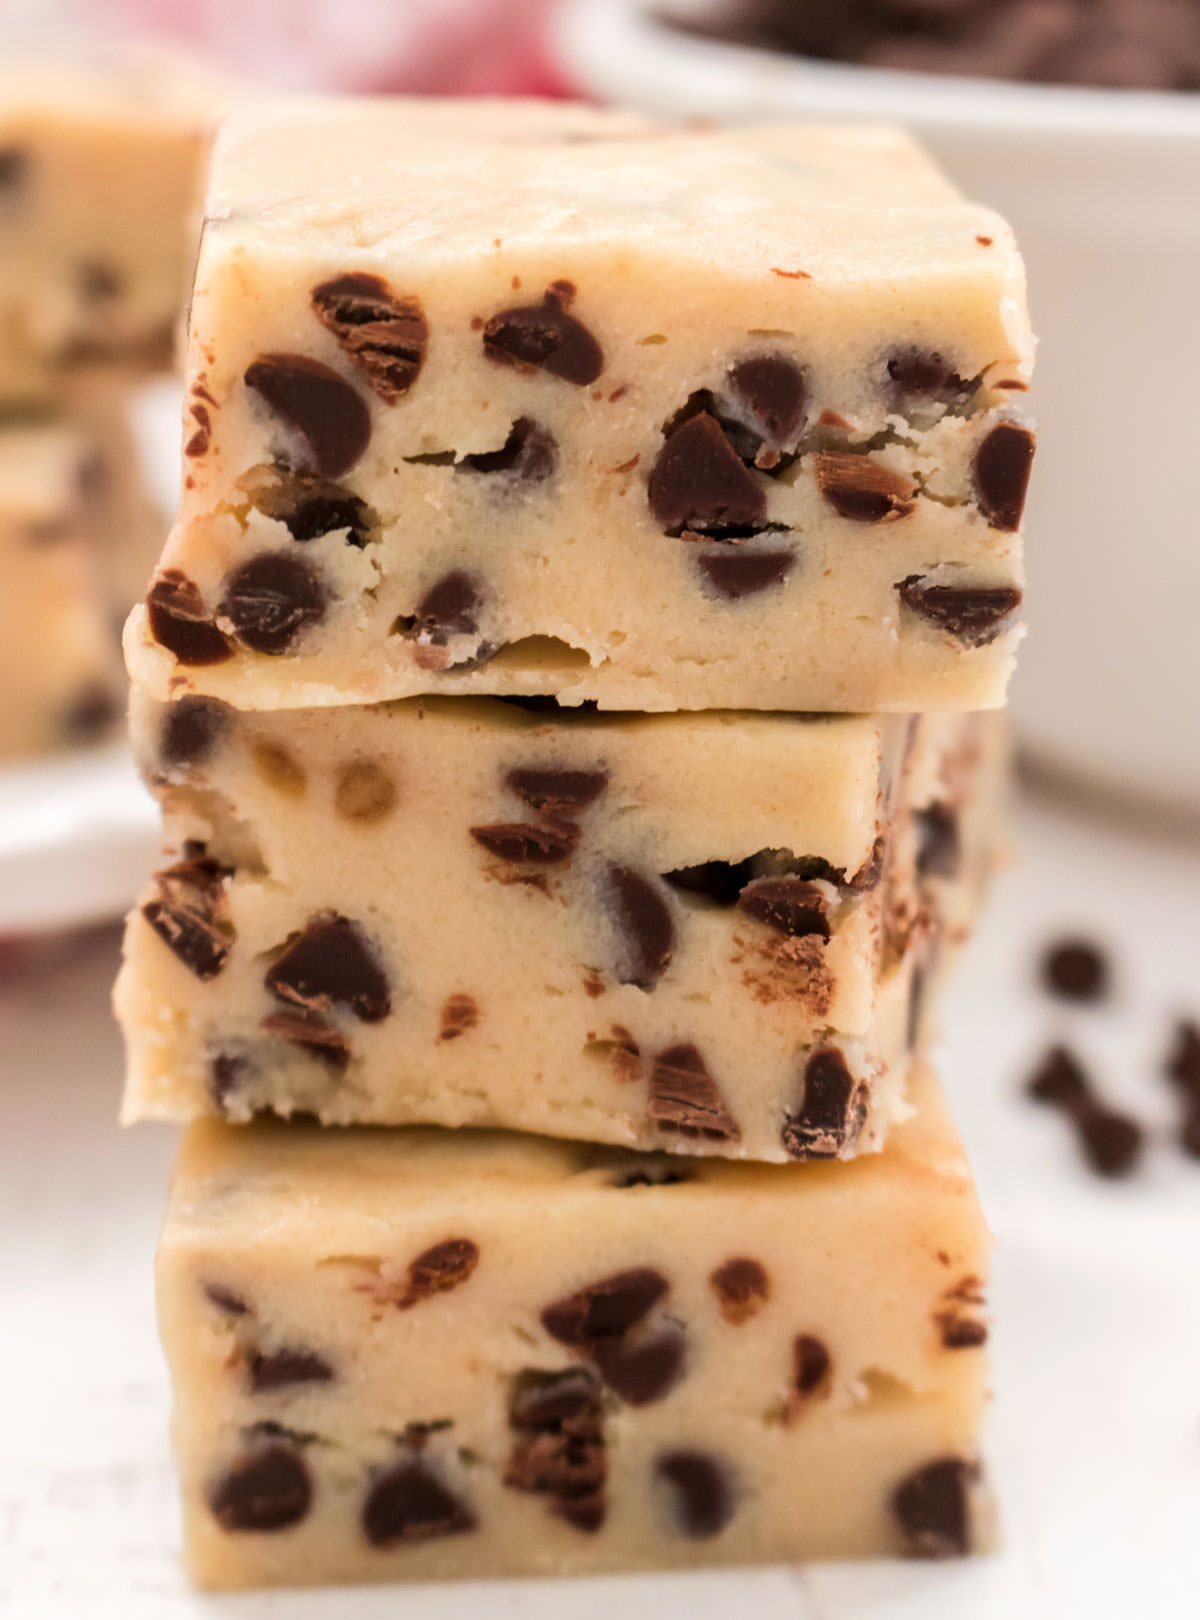 Closeup on a stack of three Cookie Dough Fudge candies sitting on a white surface in front of a plate full of more fudge.